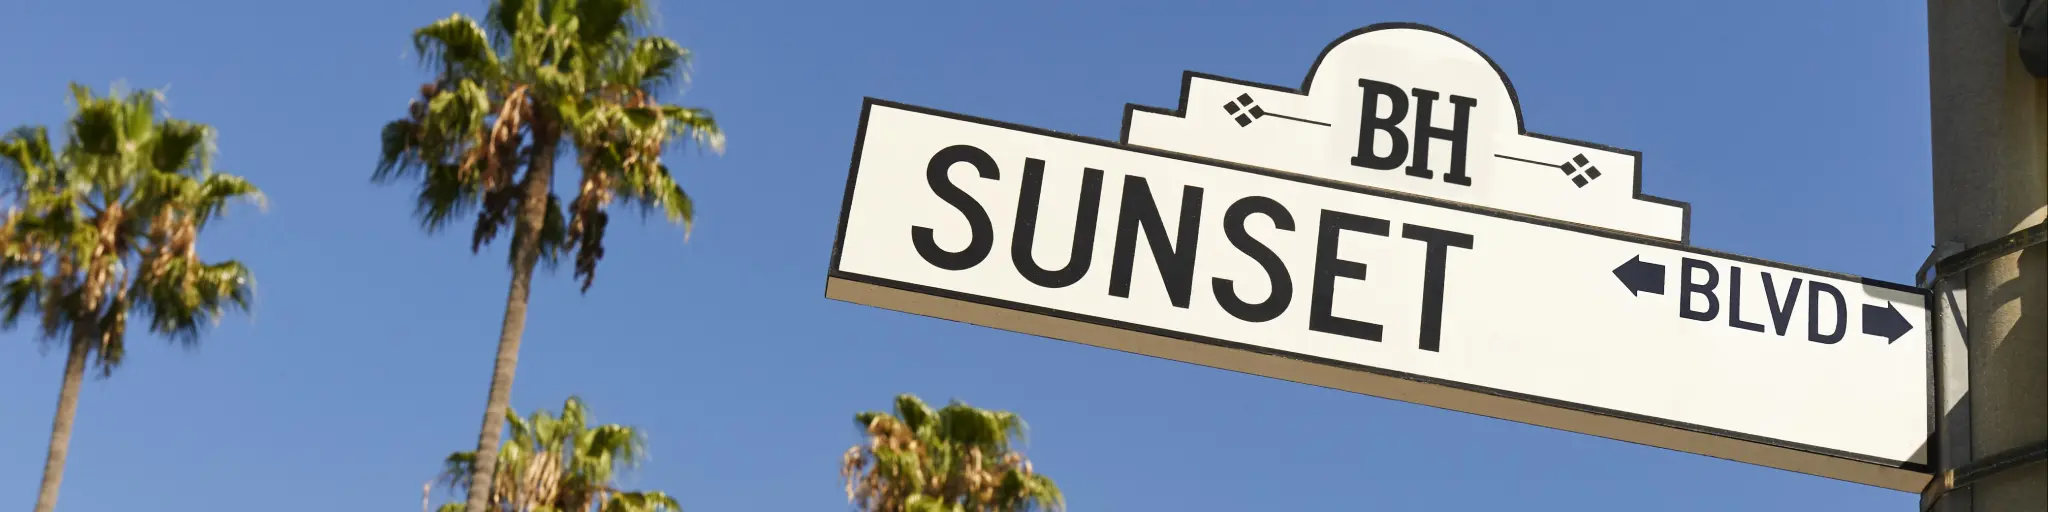 Sunset Boulevard street sign with palm trees in the background.